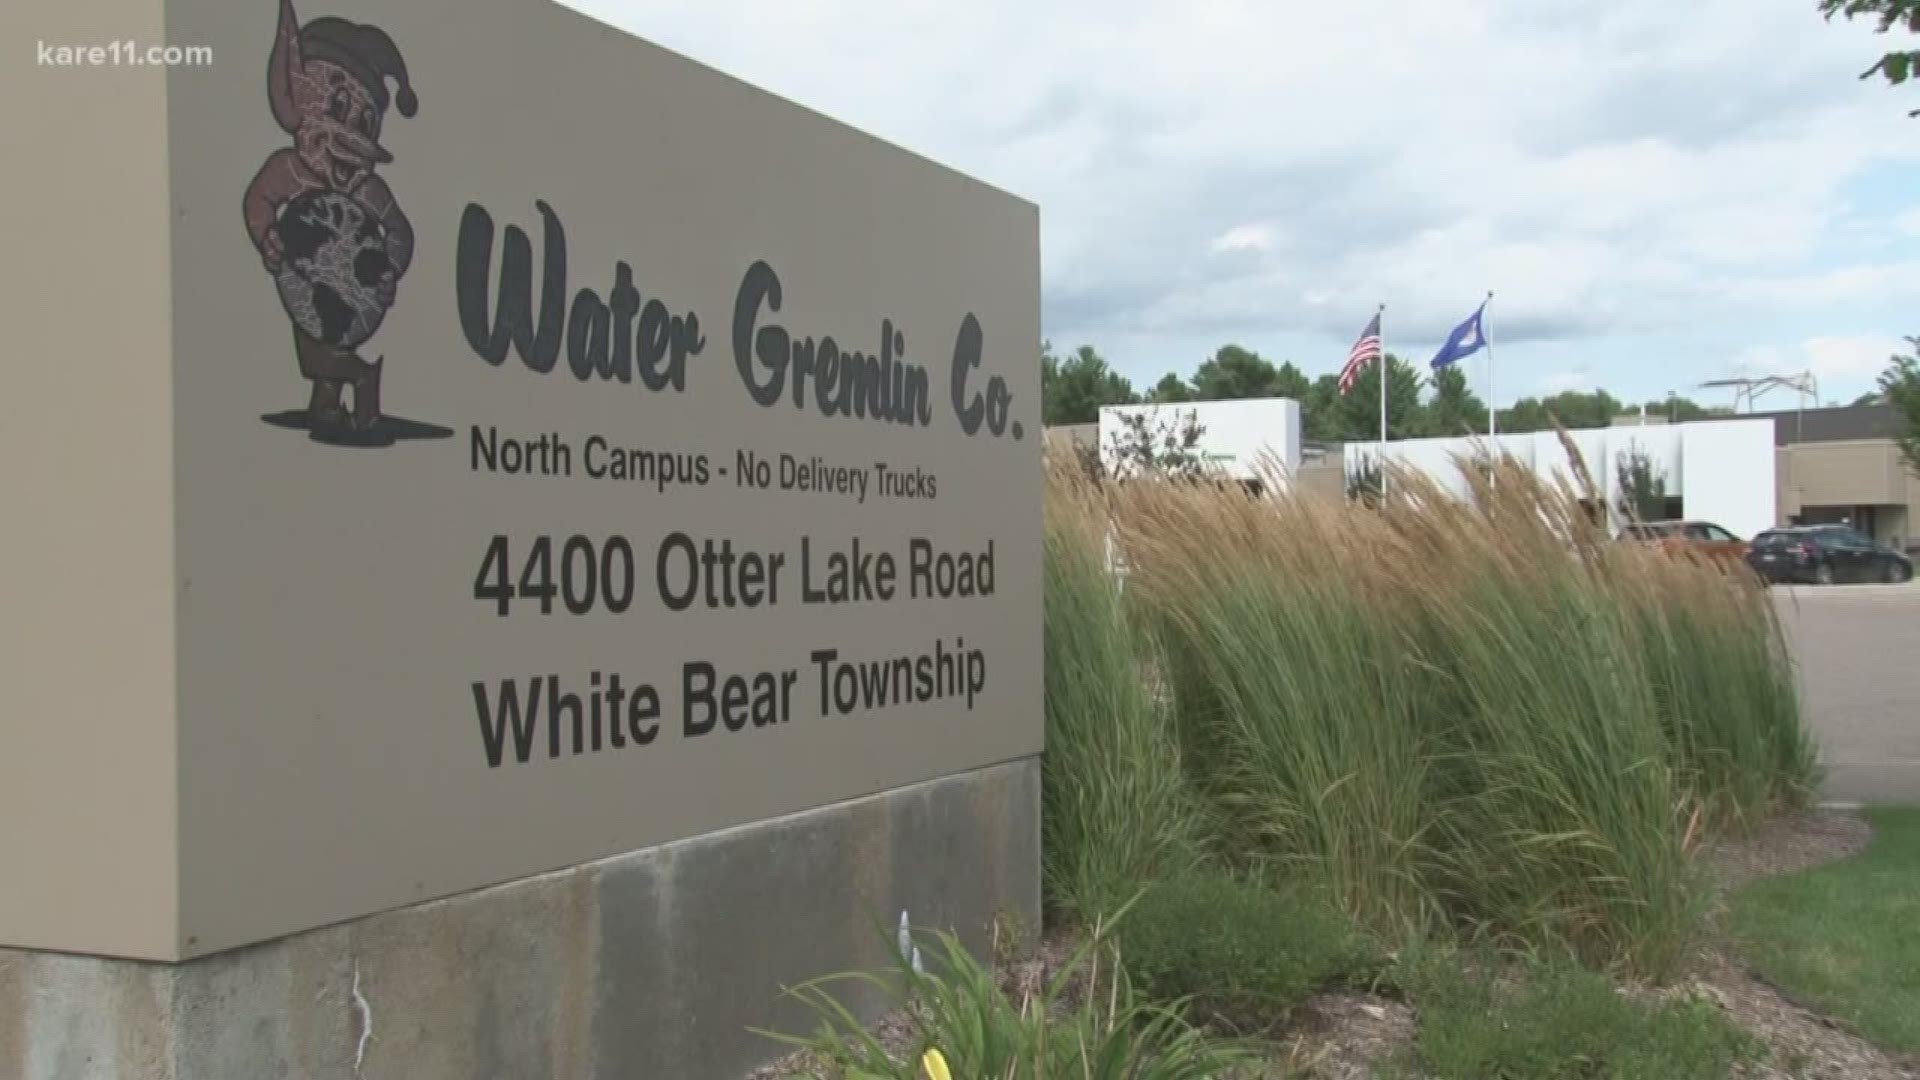 Water Gremlin, a White Bear Lake company that makes fishing sinkers and battery terminals, is in a bit of a standoff with Minnesota's environmental regulators. The MPCA asked Water Gremlin to voluntarily cease coating operations so the agency can investigate toxic ground vapors under the building. The company disagrees with the agency.